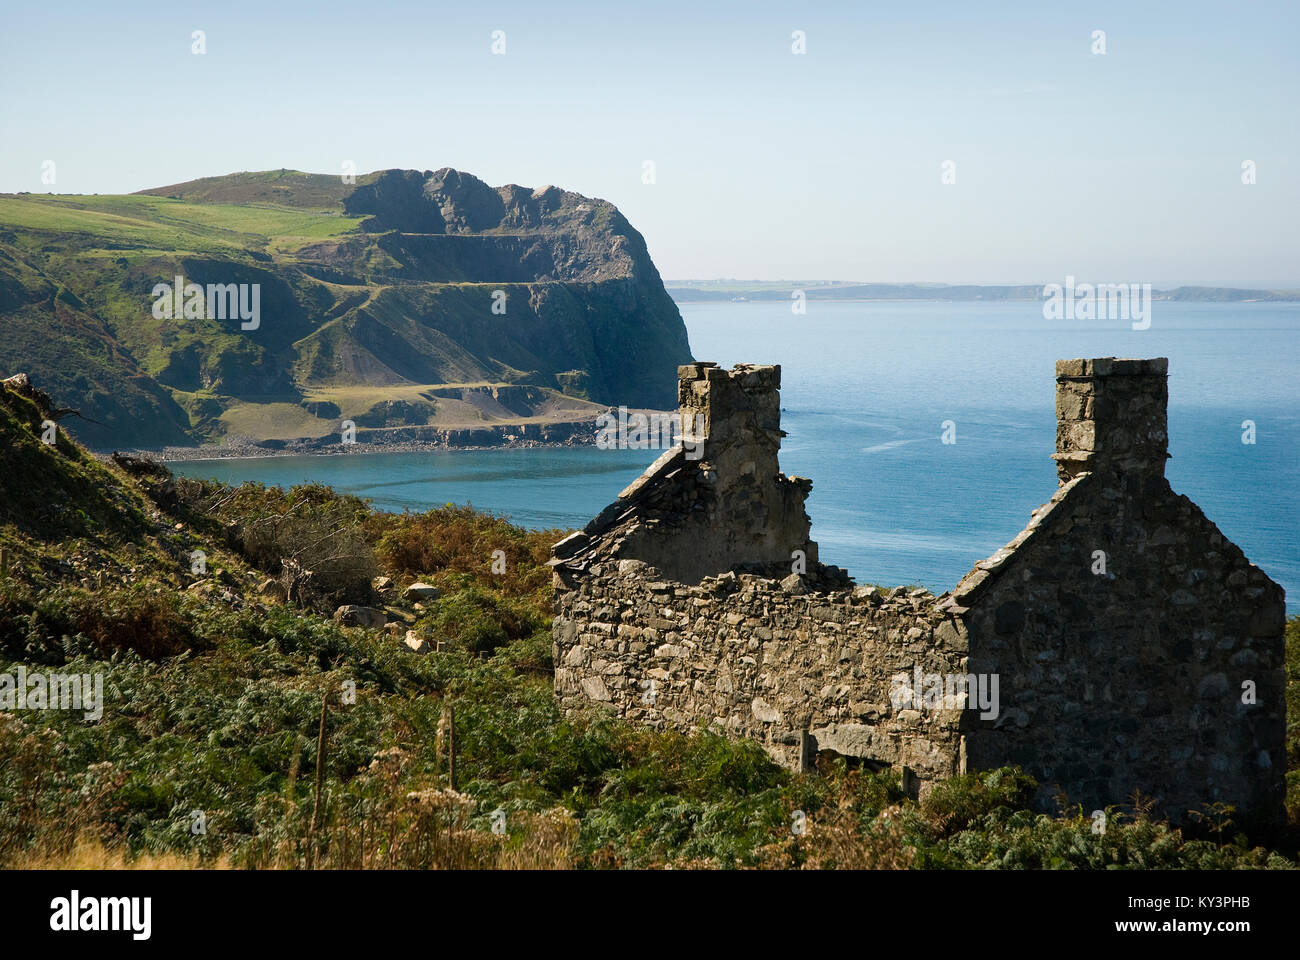 View from Nant Gwrtheyrn, the Welsh Language and Heritage Centre, Llyn Peninsula, Gwynedd, North wales UK Stock Photo